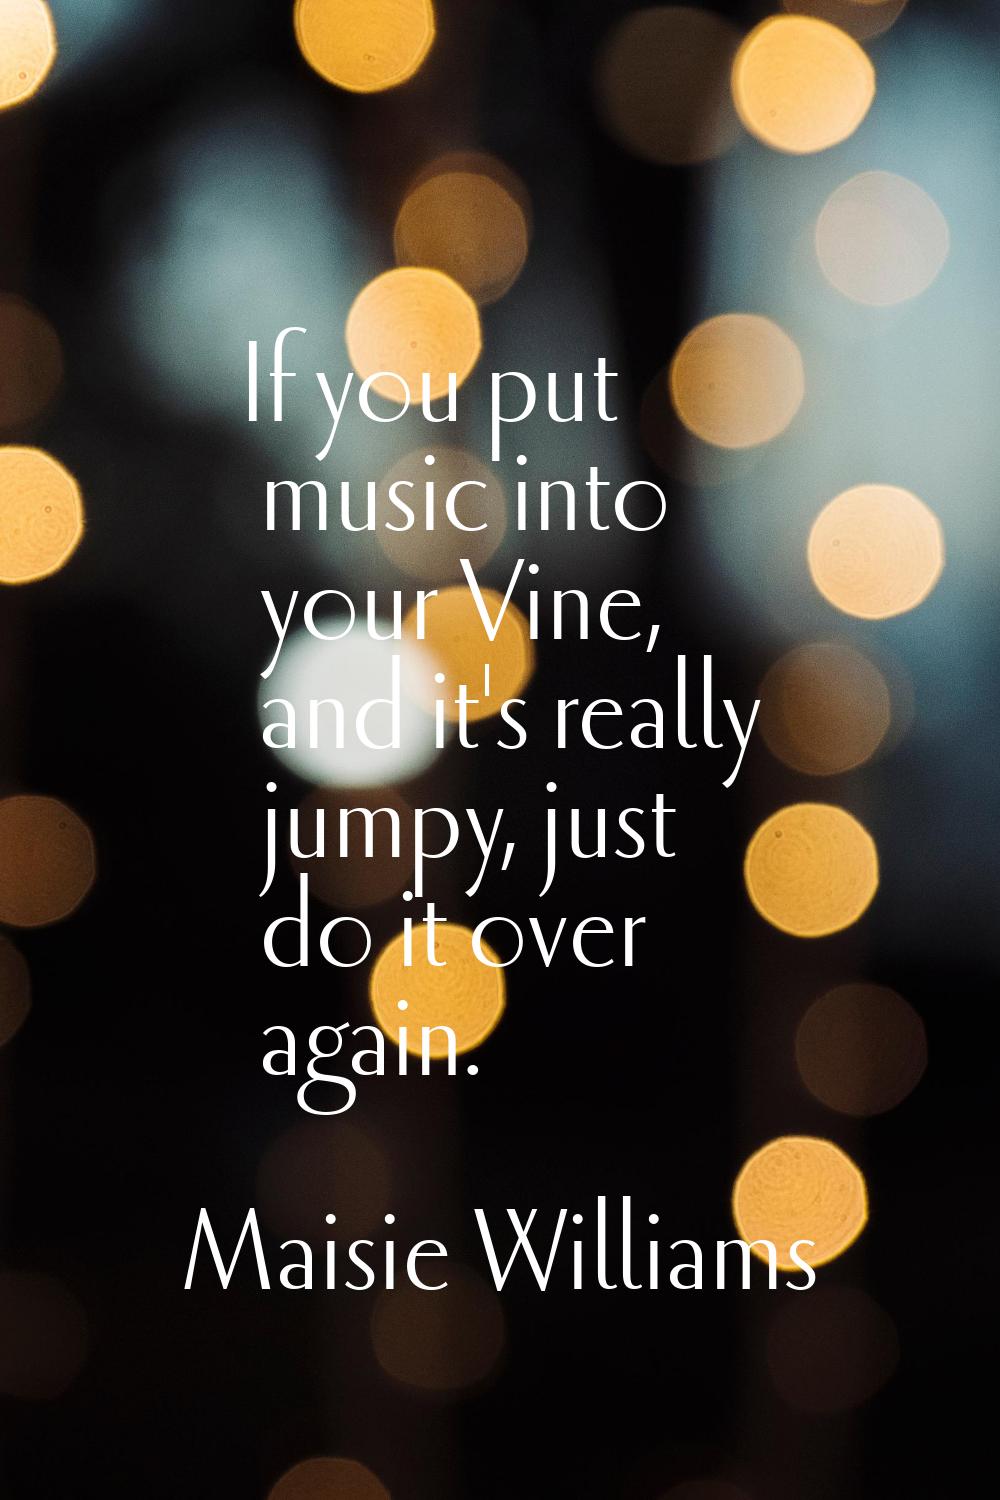 If you put music into your Vine, and it's really jumpy, just do it over again.